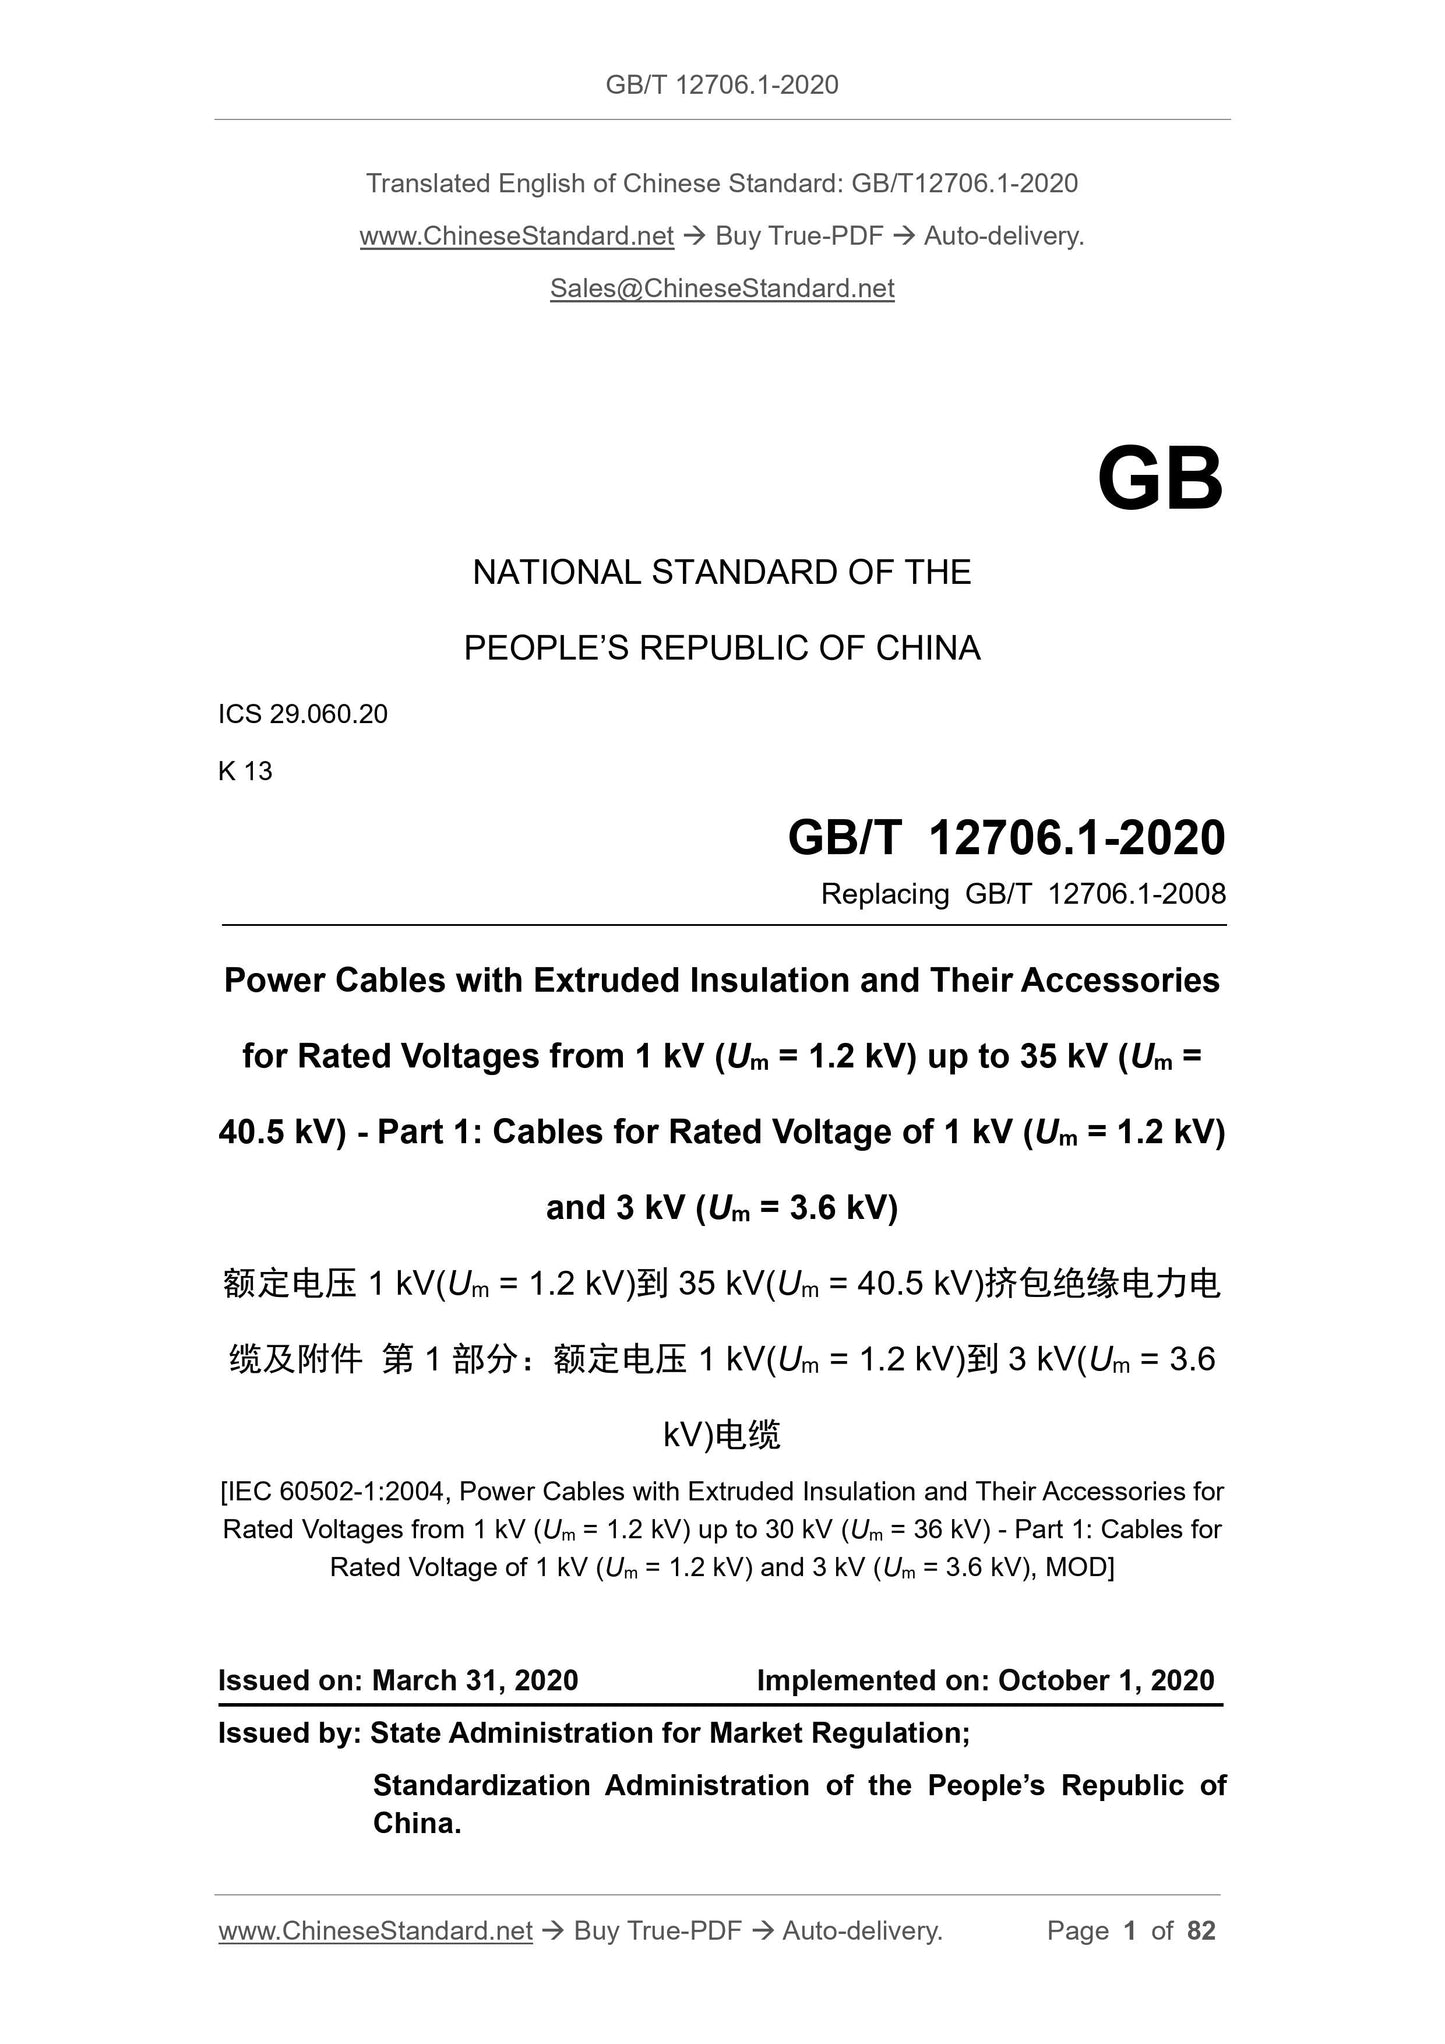 GB/T 12706.1-2020 Page 1